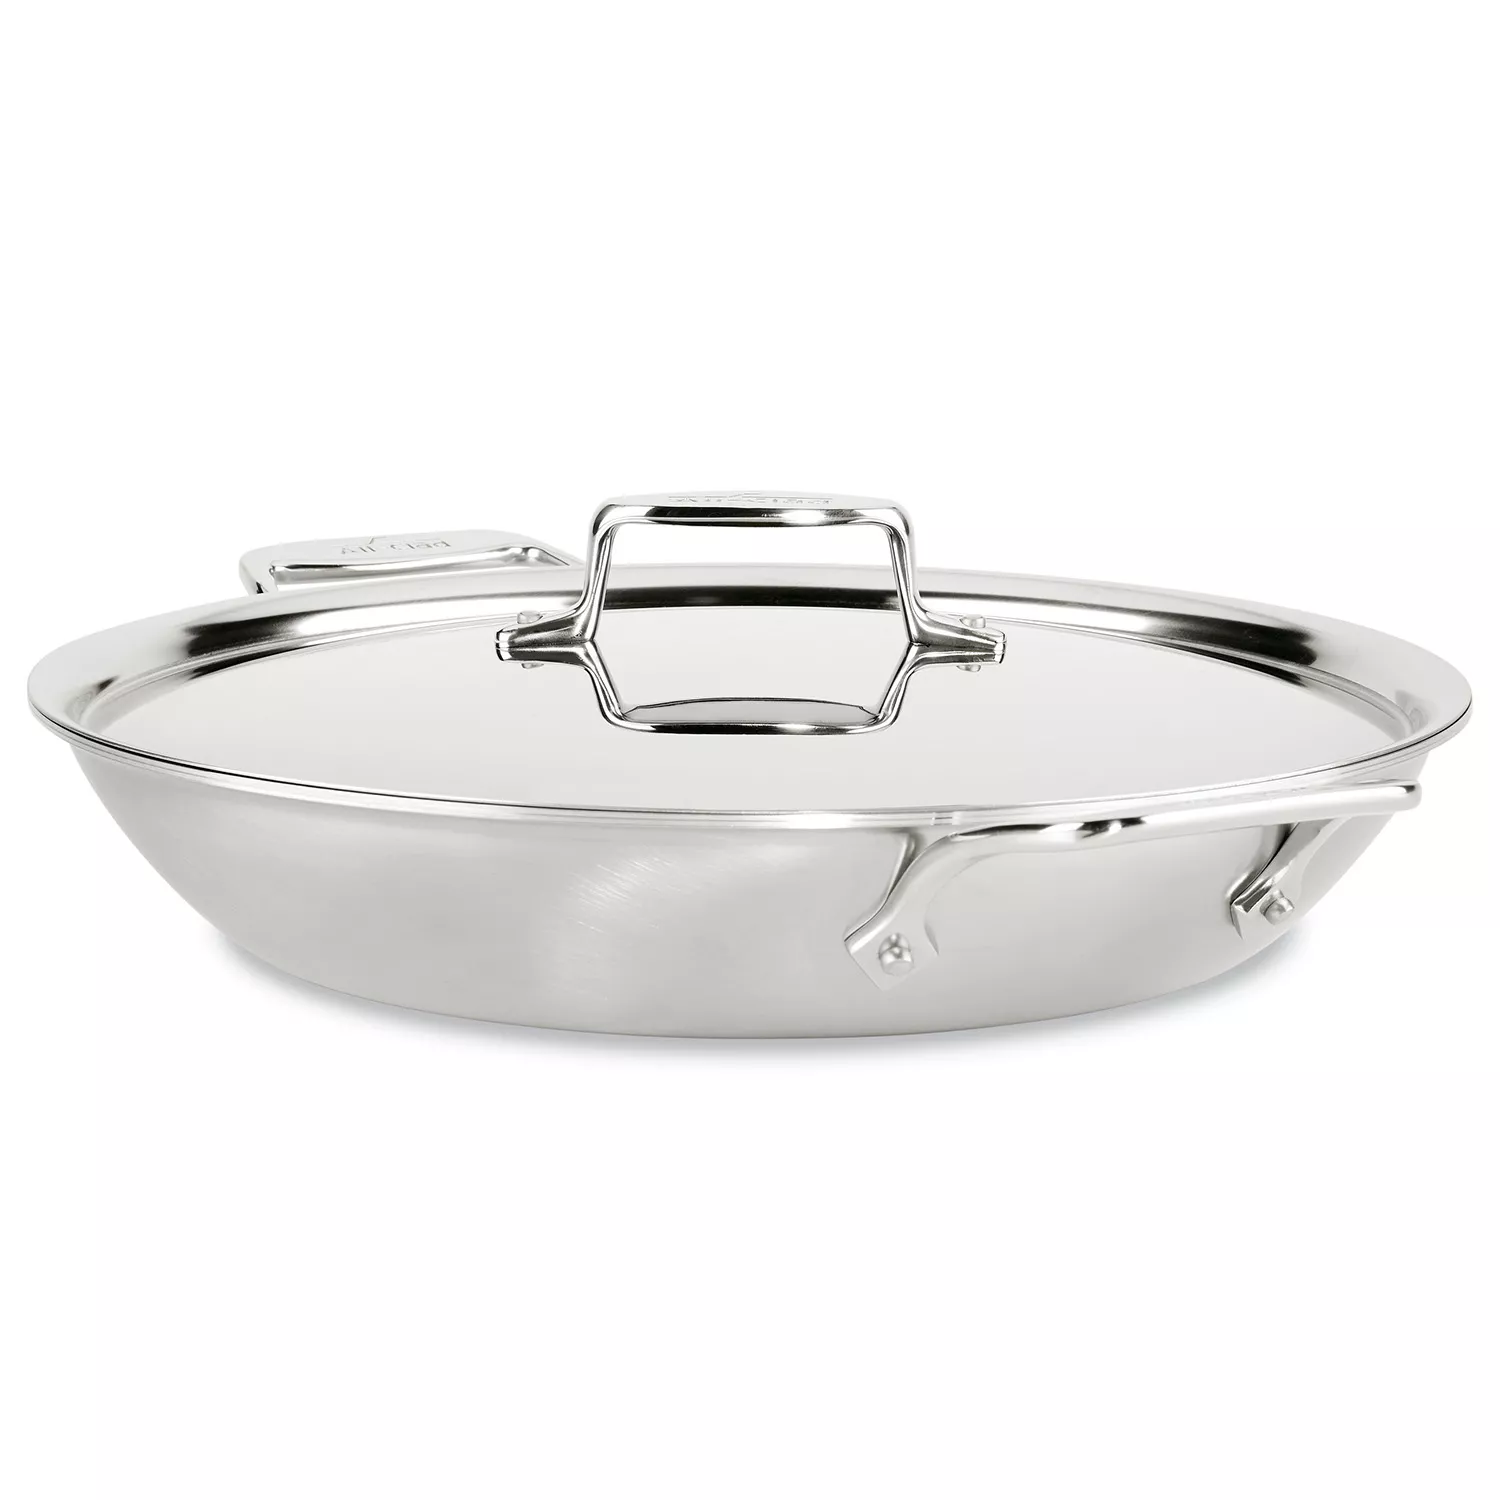 All-Clad's Stainless Steel Saucepan Is 33% Off Right Now